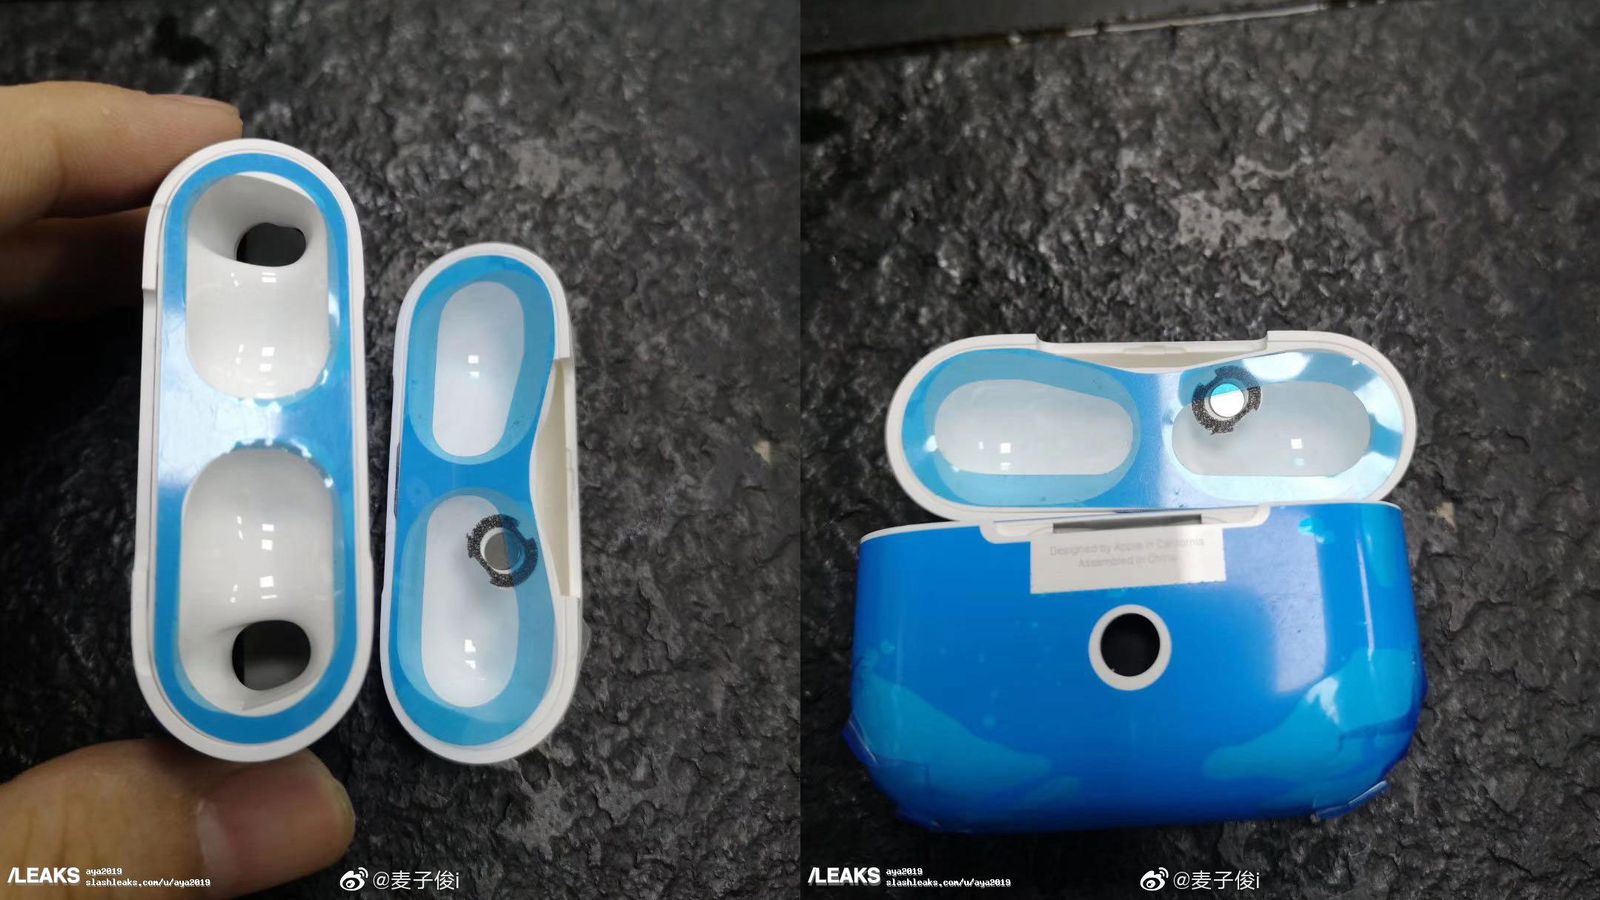 New Images of Rumored AirPods Pro Charging Case [Updated] - MacRumors